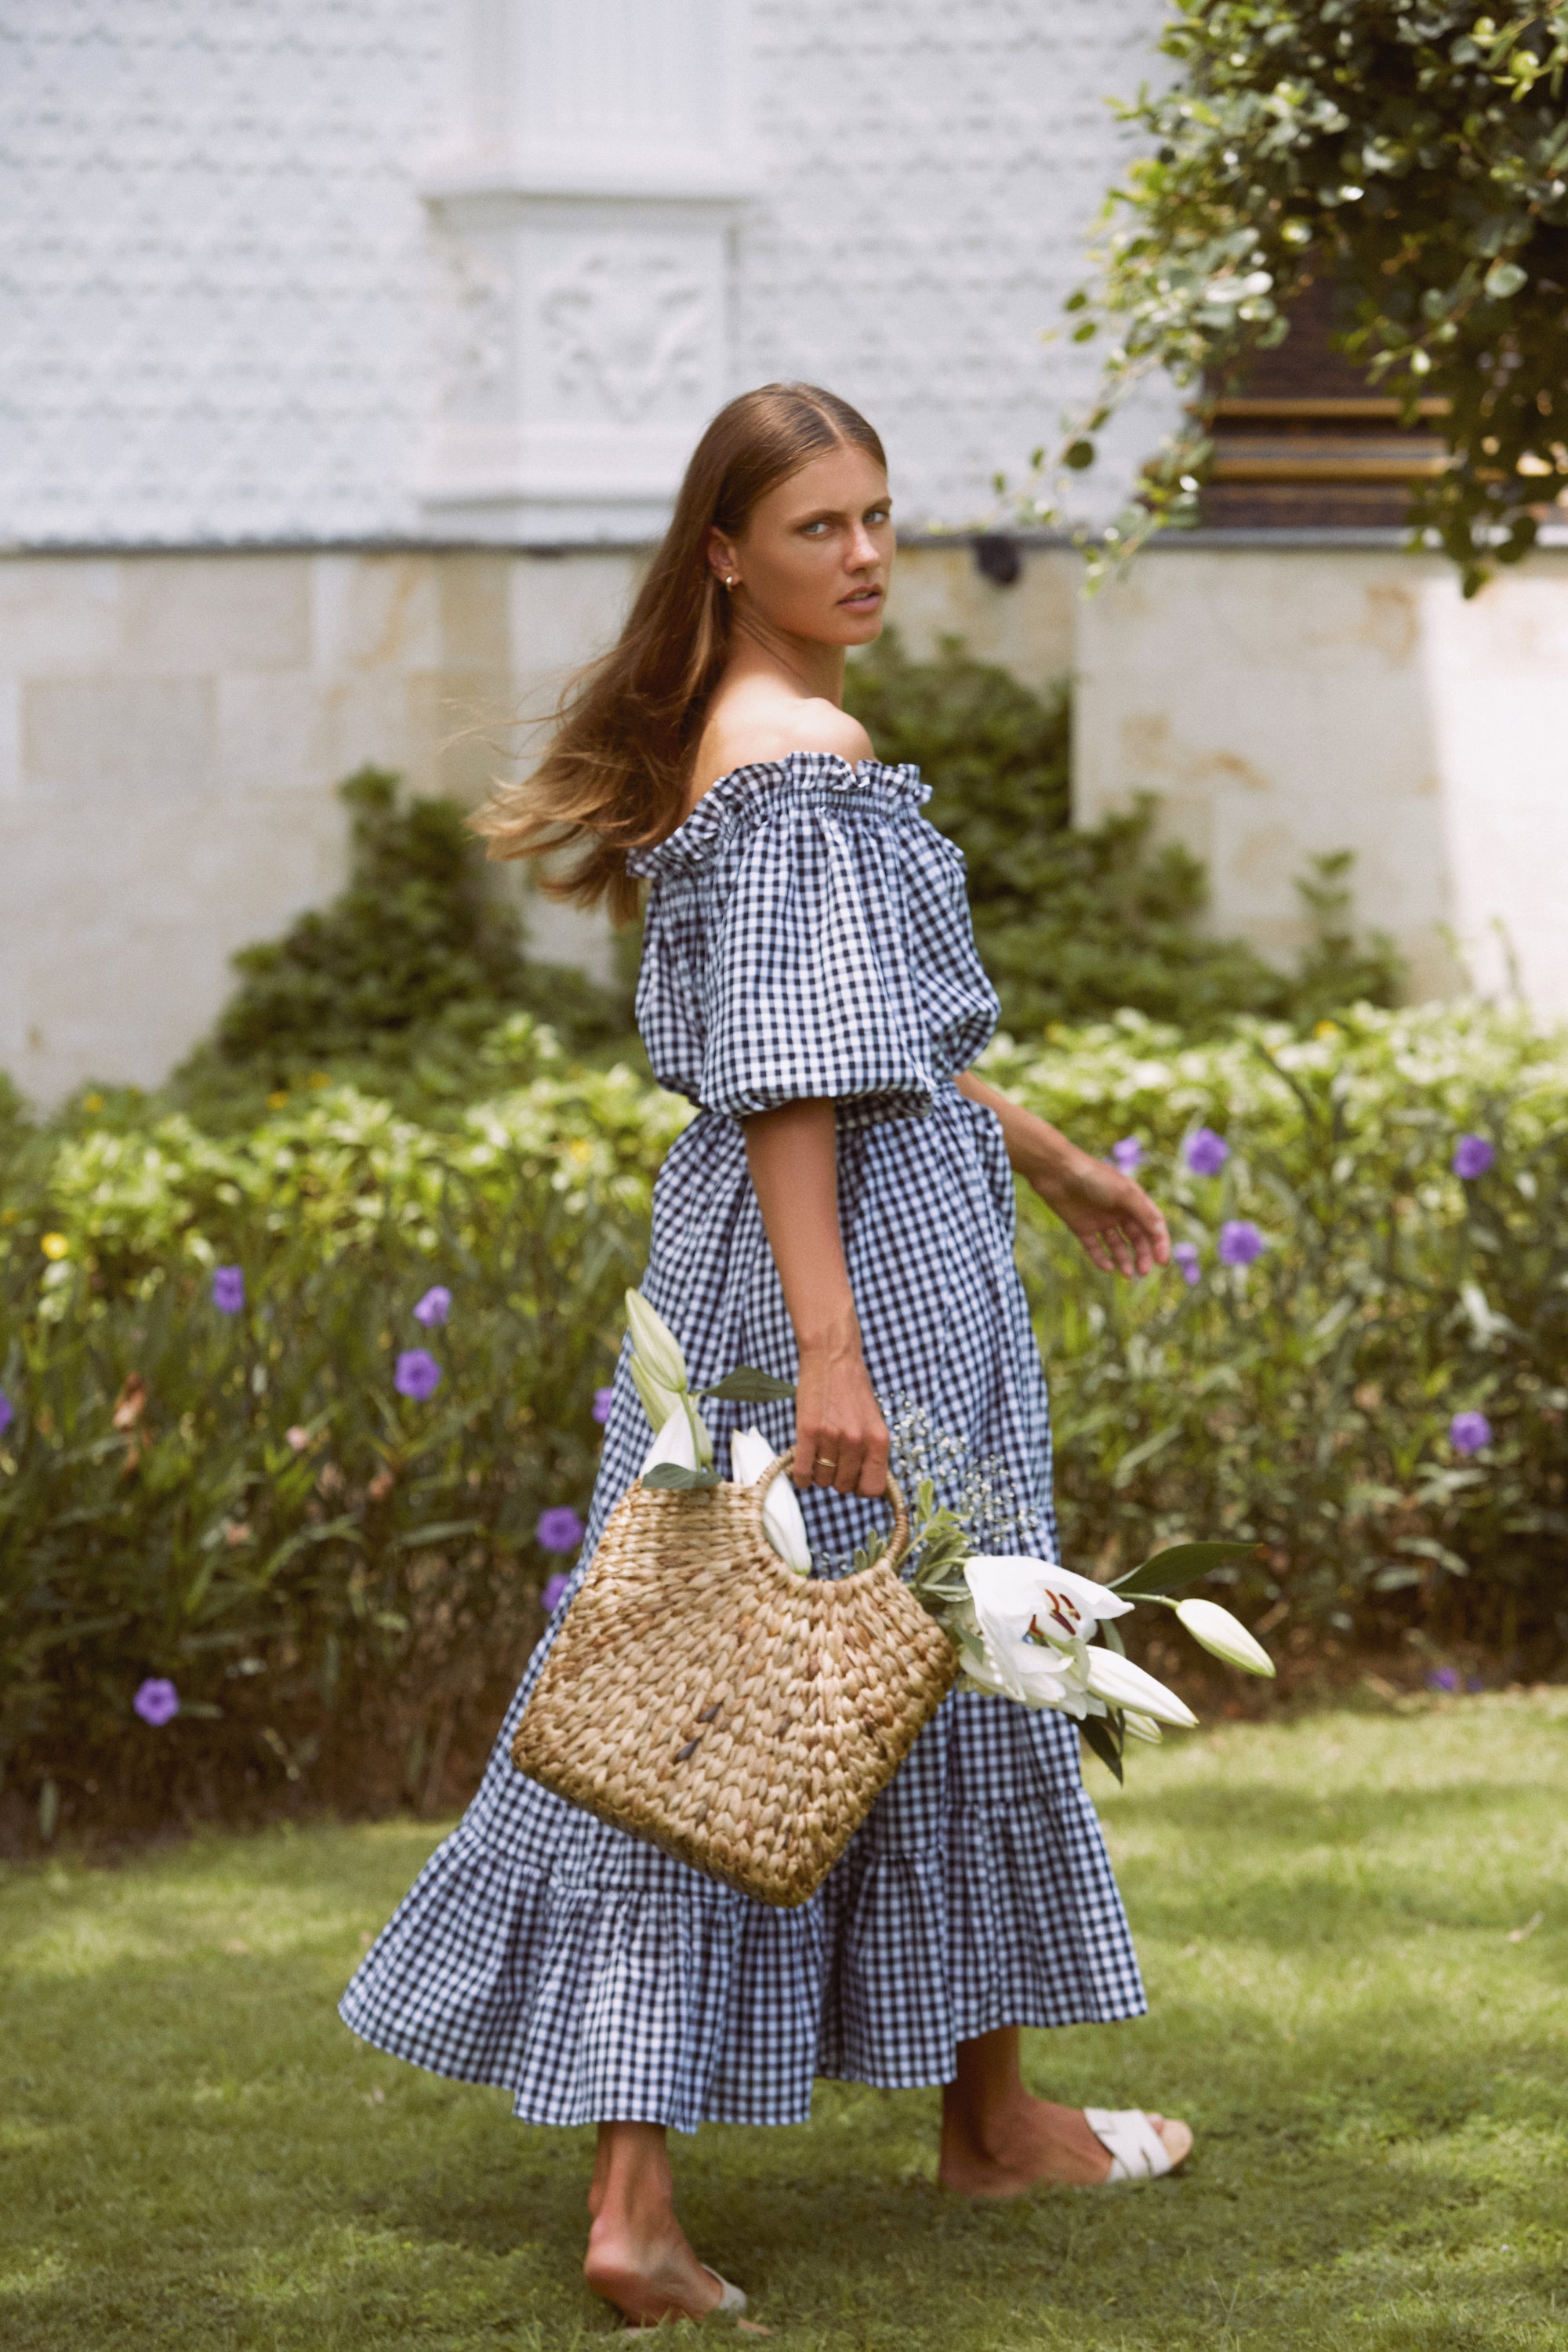 Woman in a maxi gingham dress carrying a wicker basket with white flowers